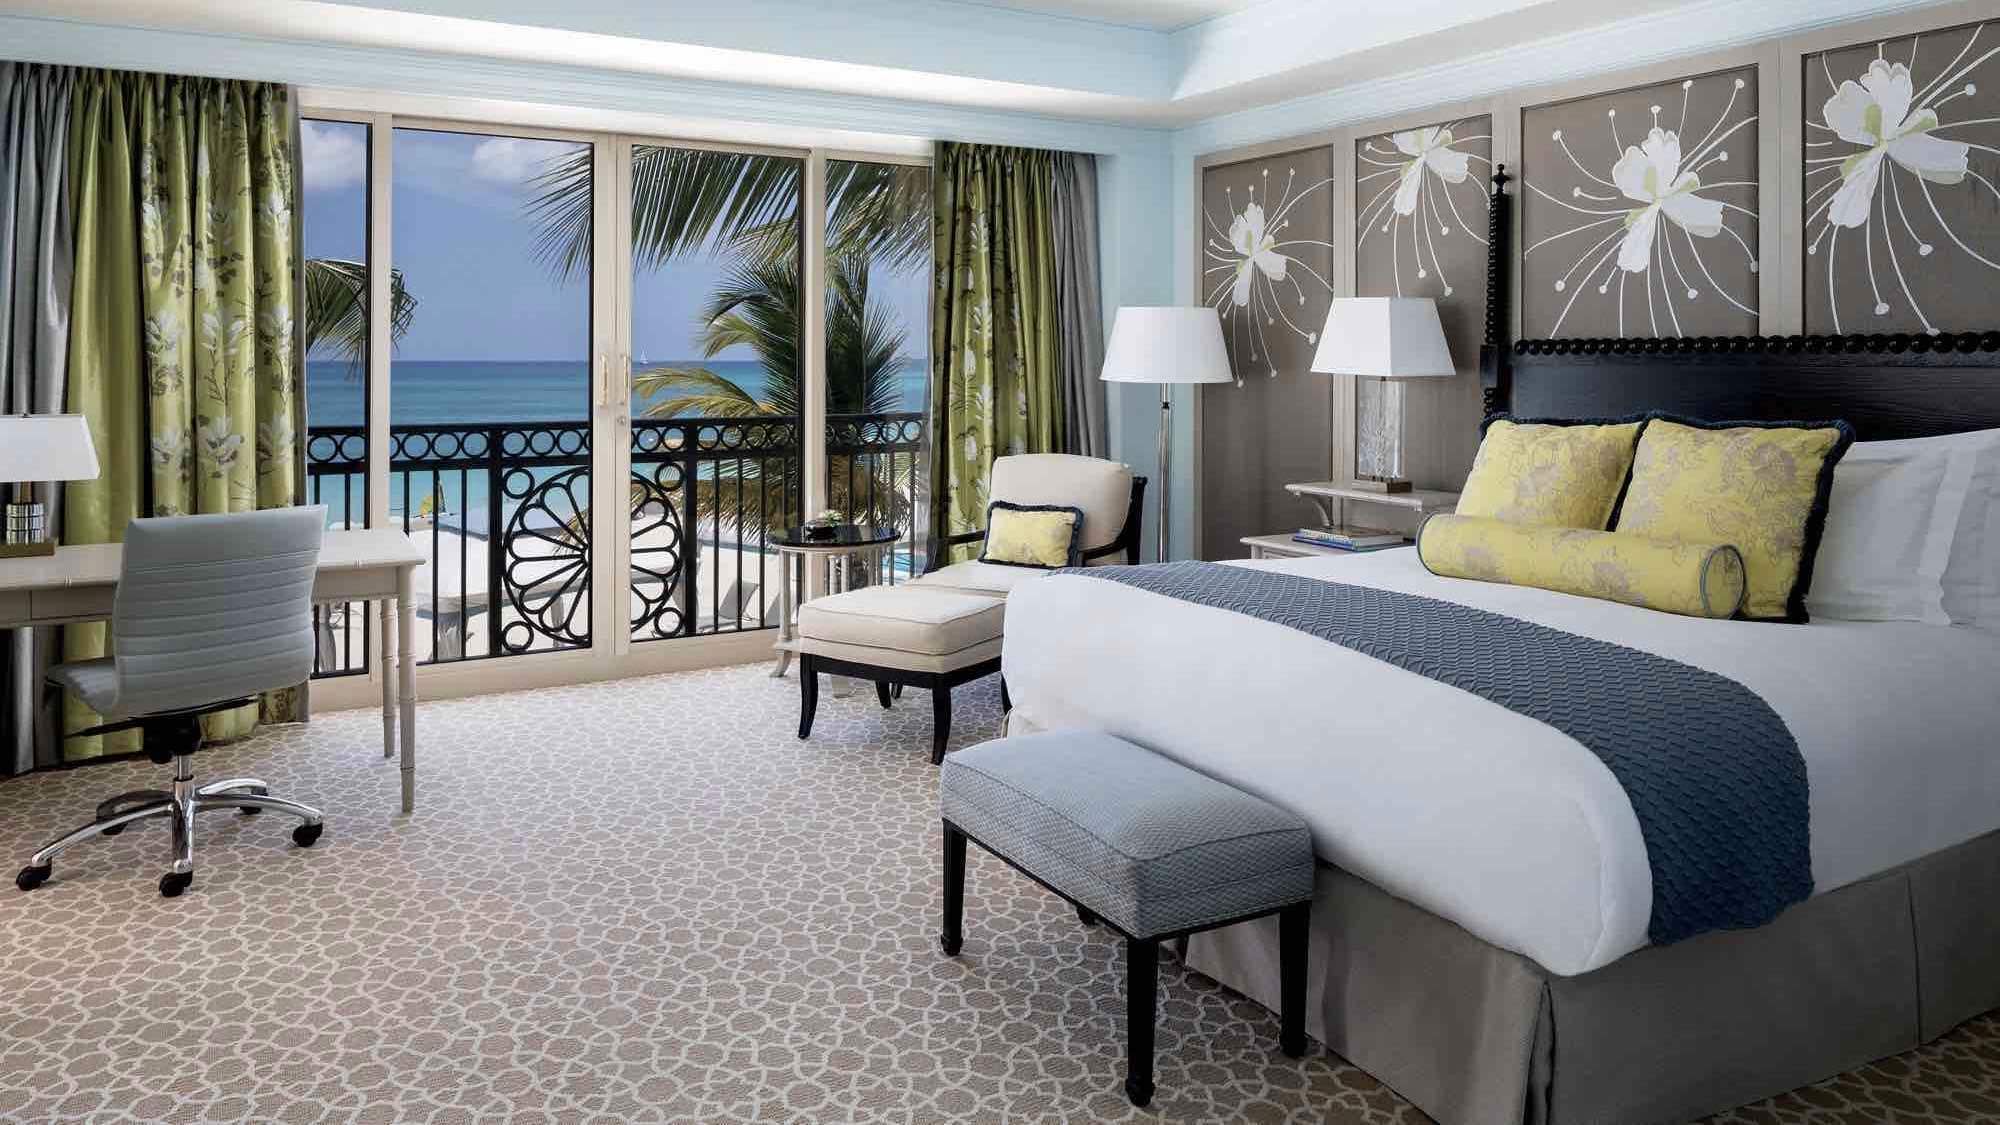 The Ritz-Carlton, Grand Cayman with ocean view bedroom